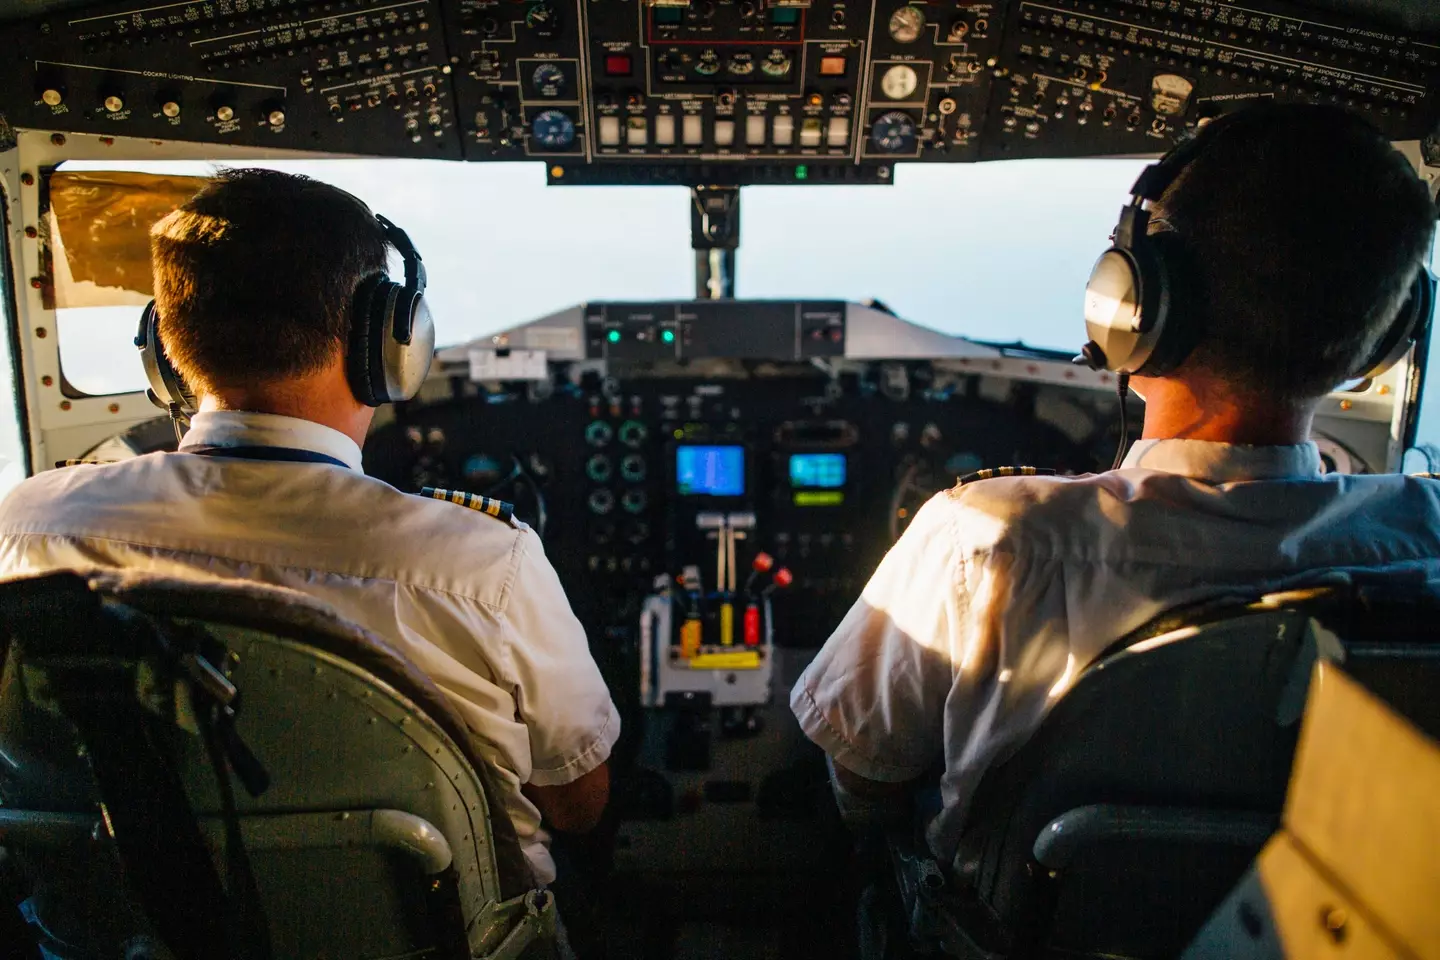 There are two different types of sleep pilots can take while in the air.